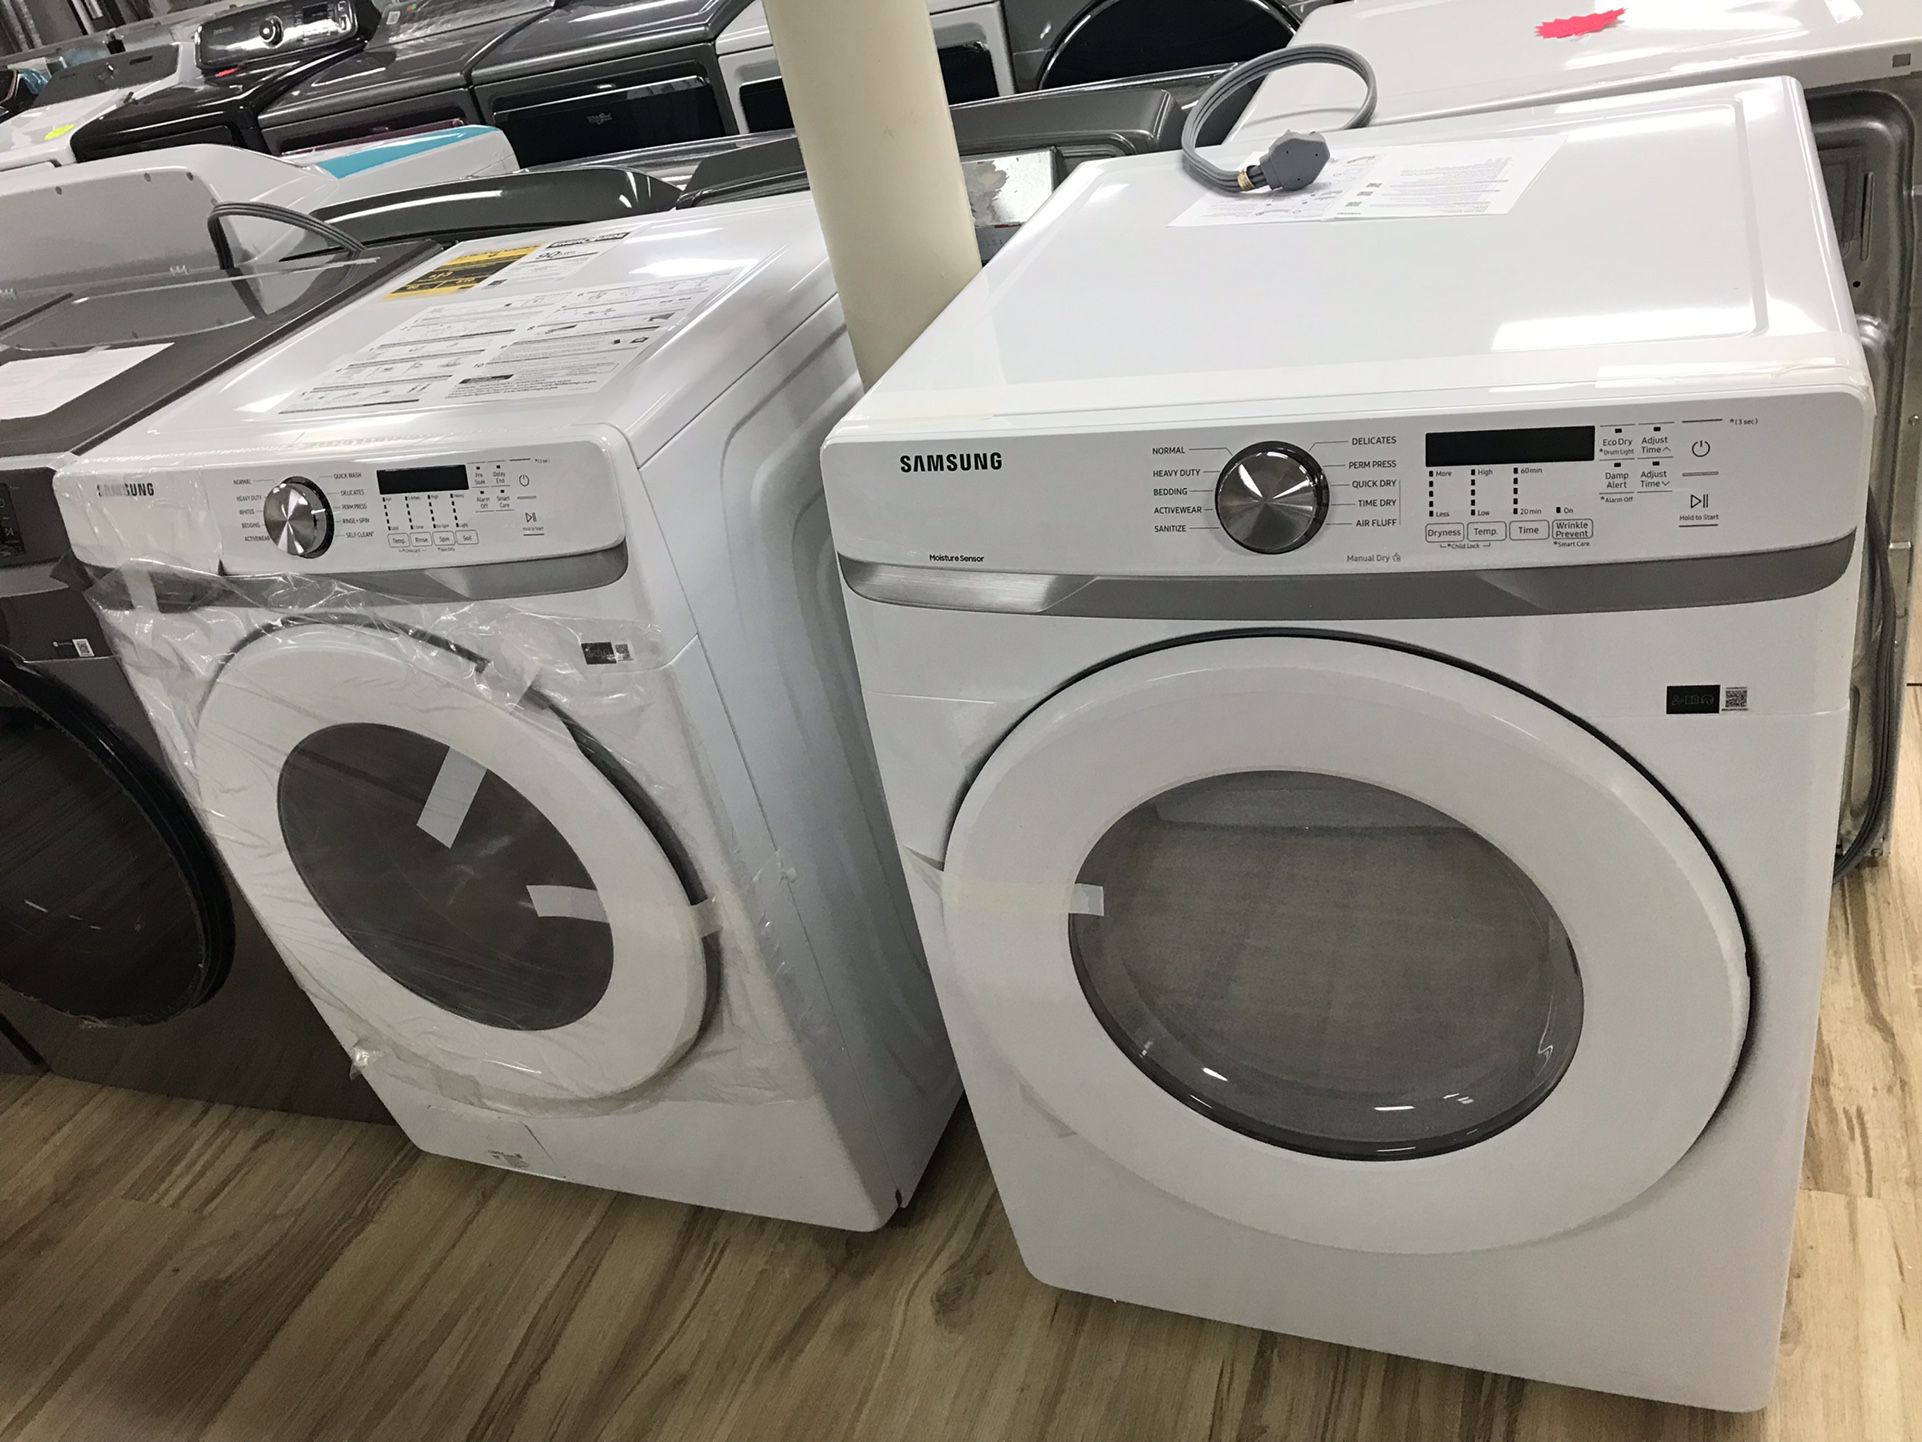 Samsung washer and dryer set in white